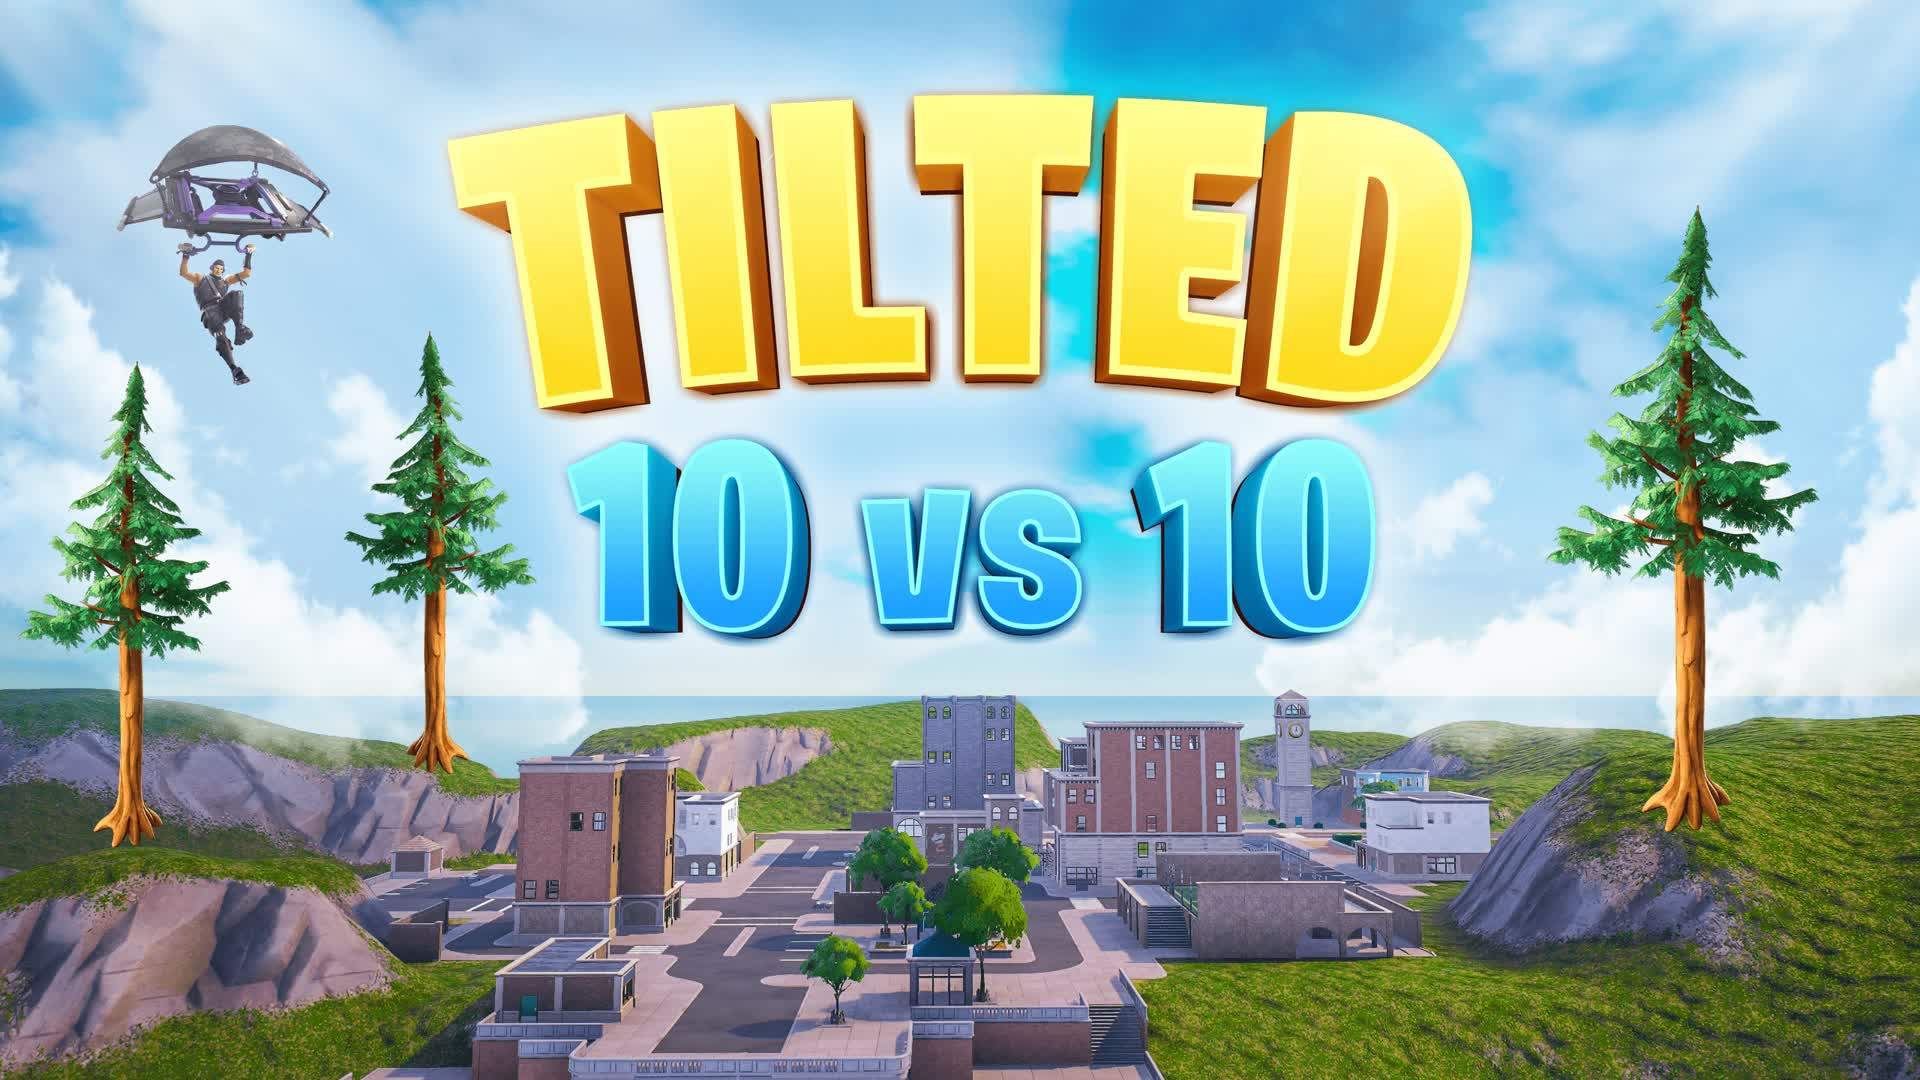 ⭐(10 vs 10) TILTED TOWERS⭐